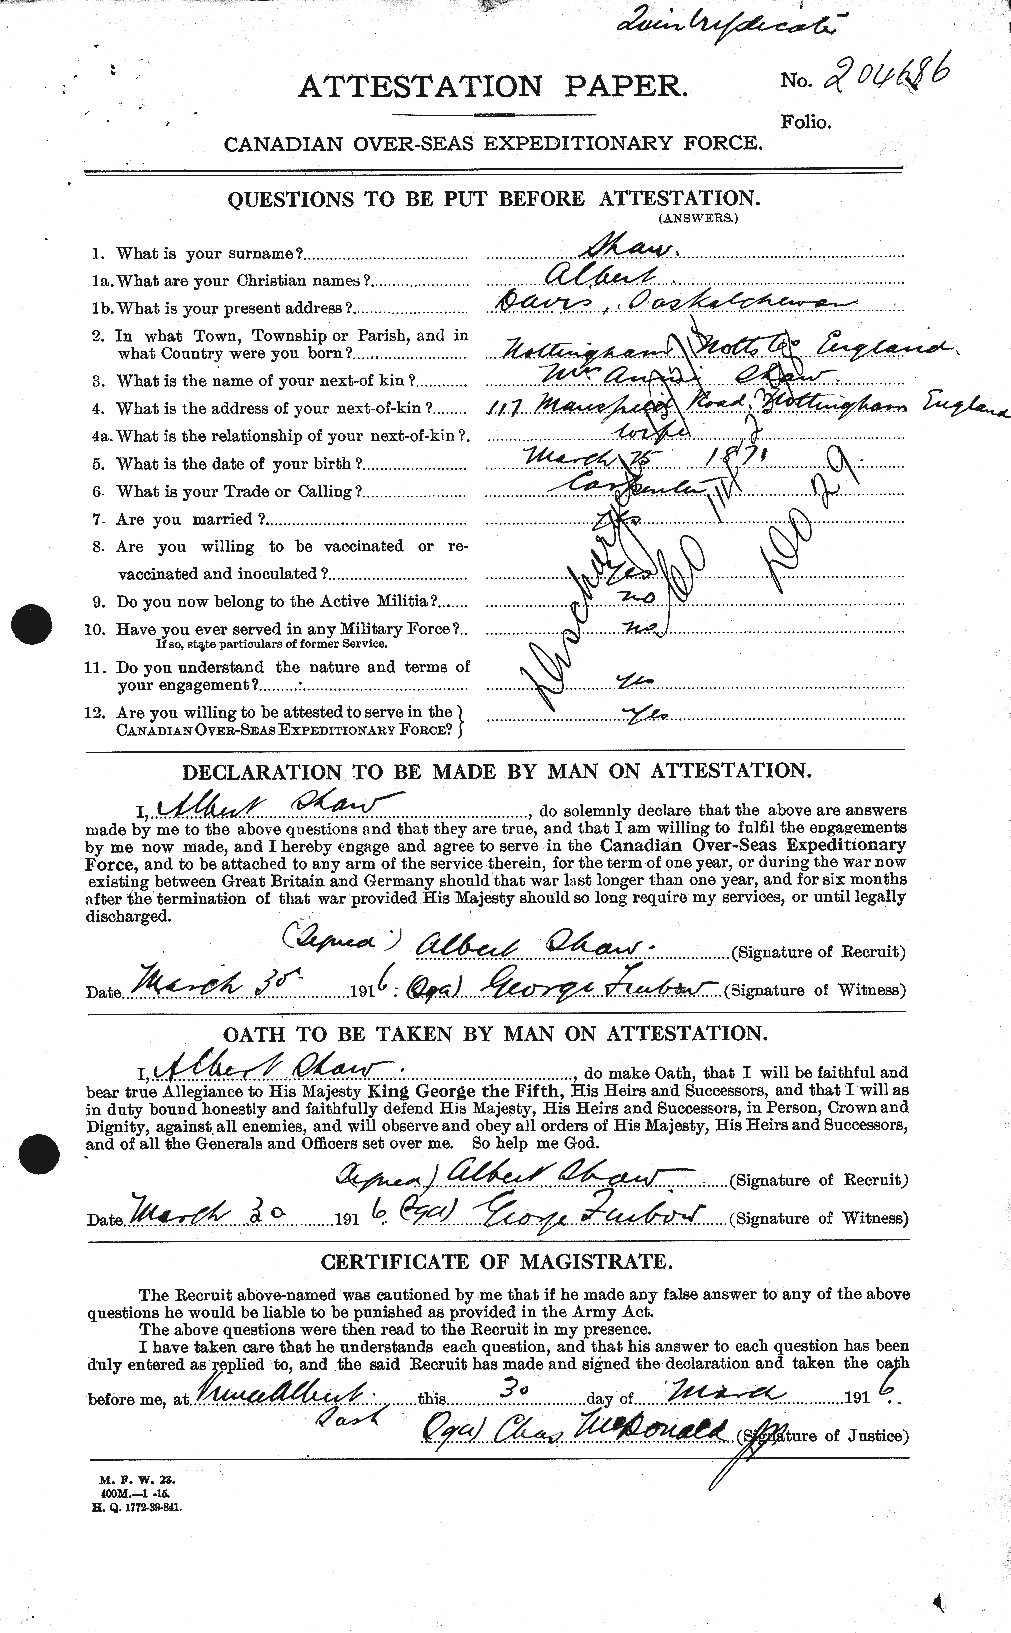 Personnel Records of the First World War - CEF 093395a